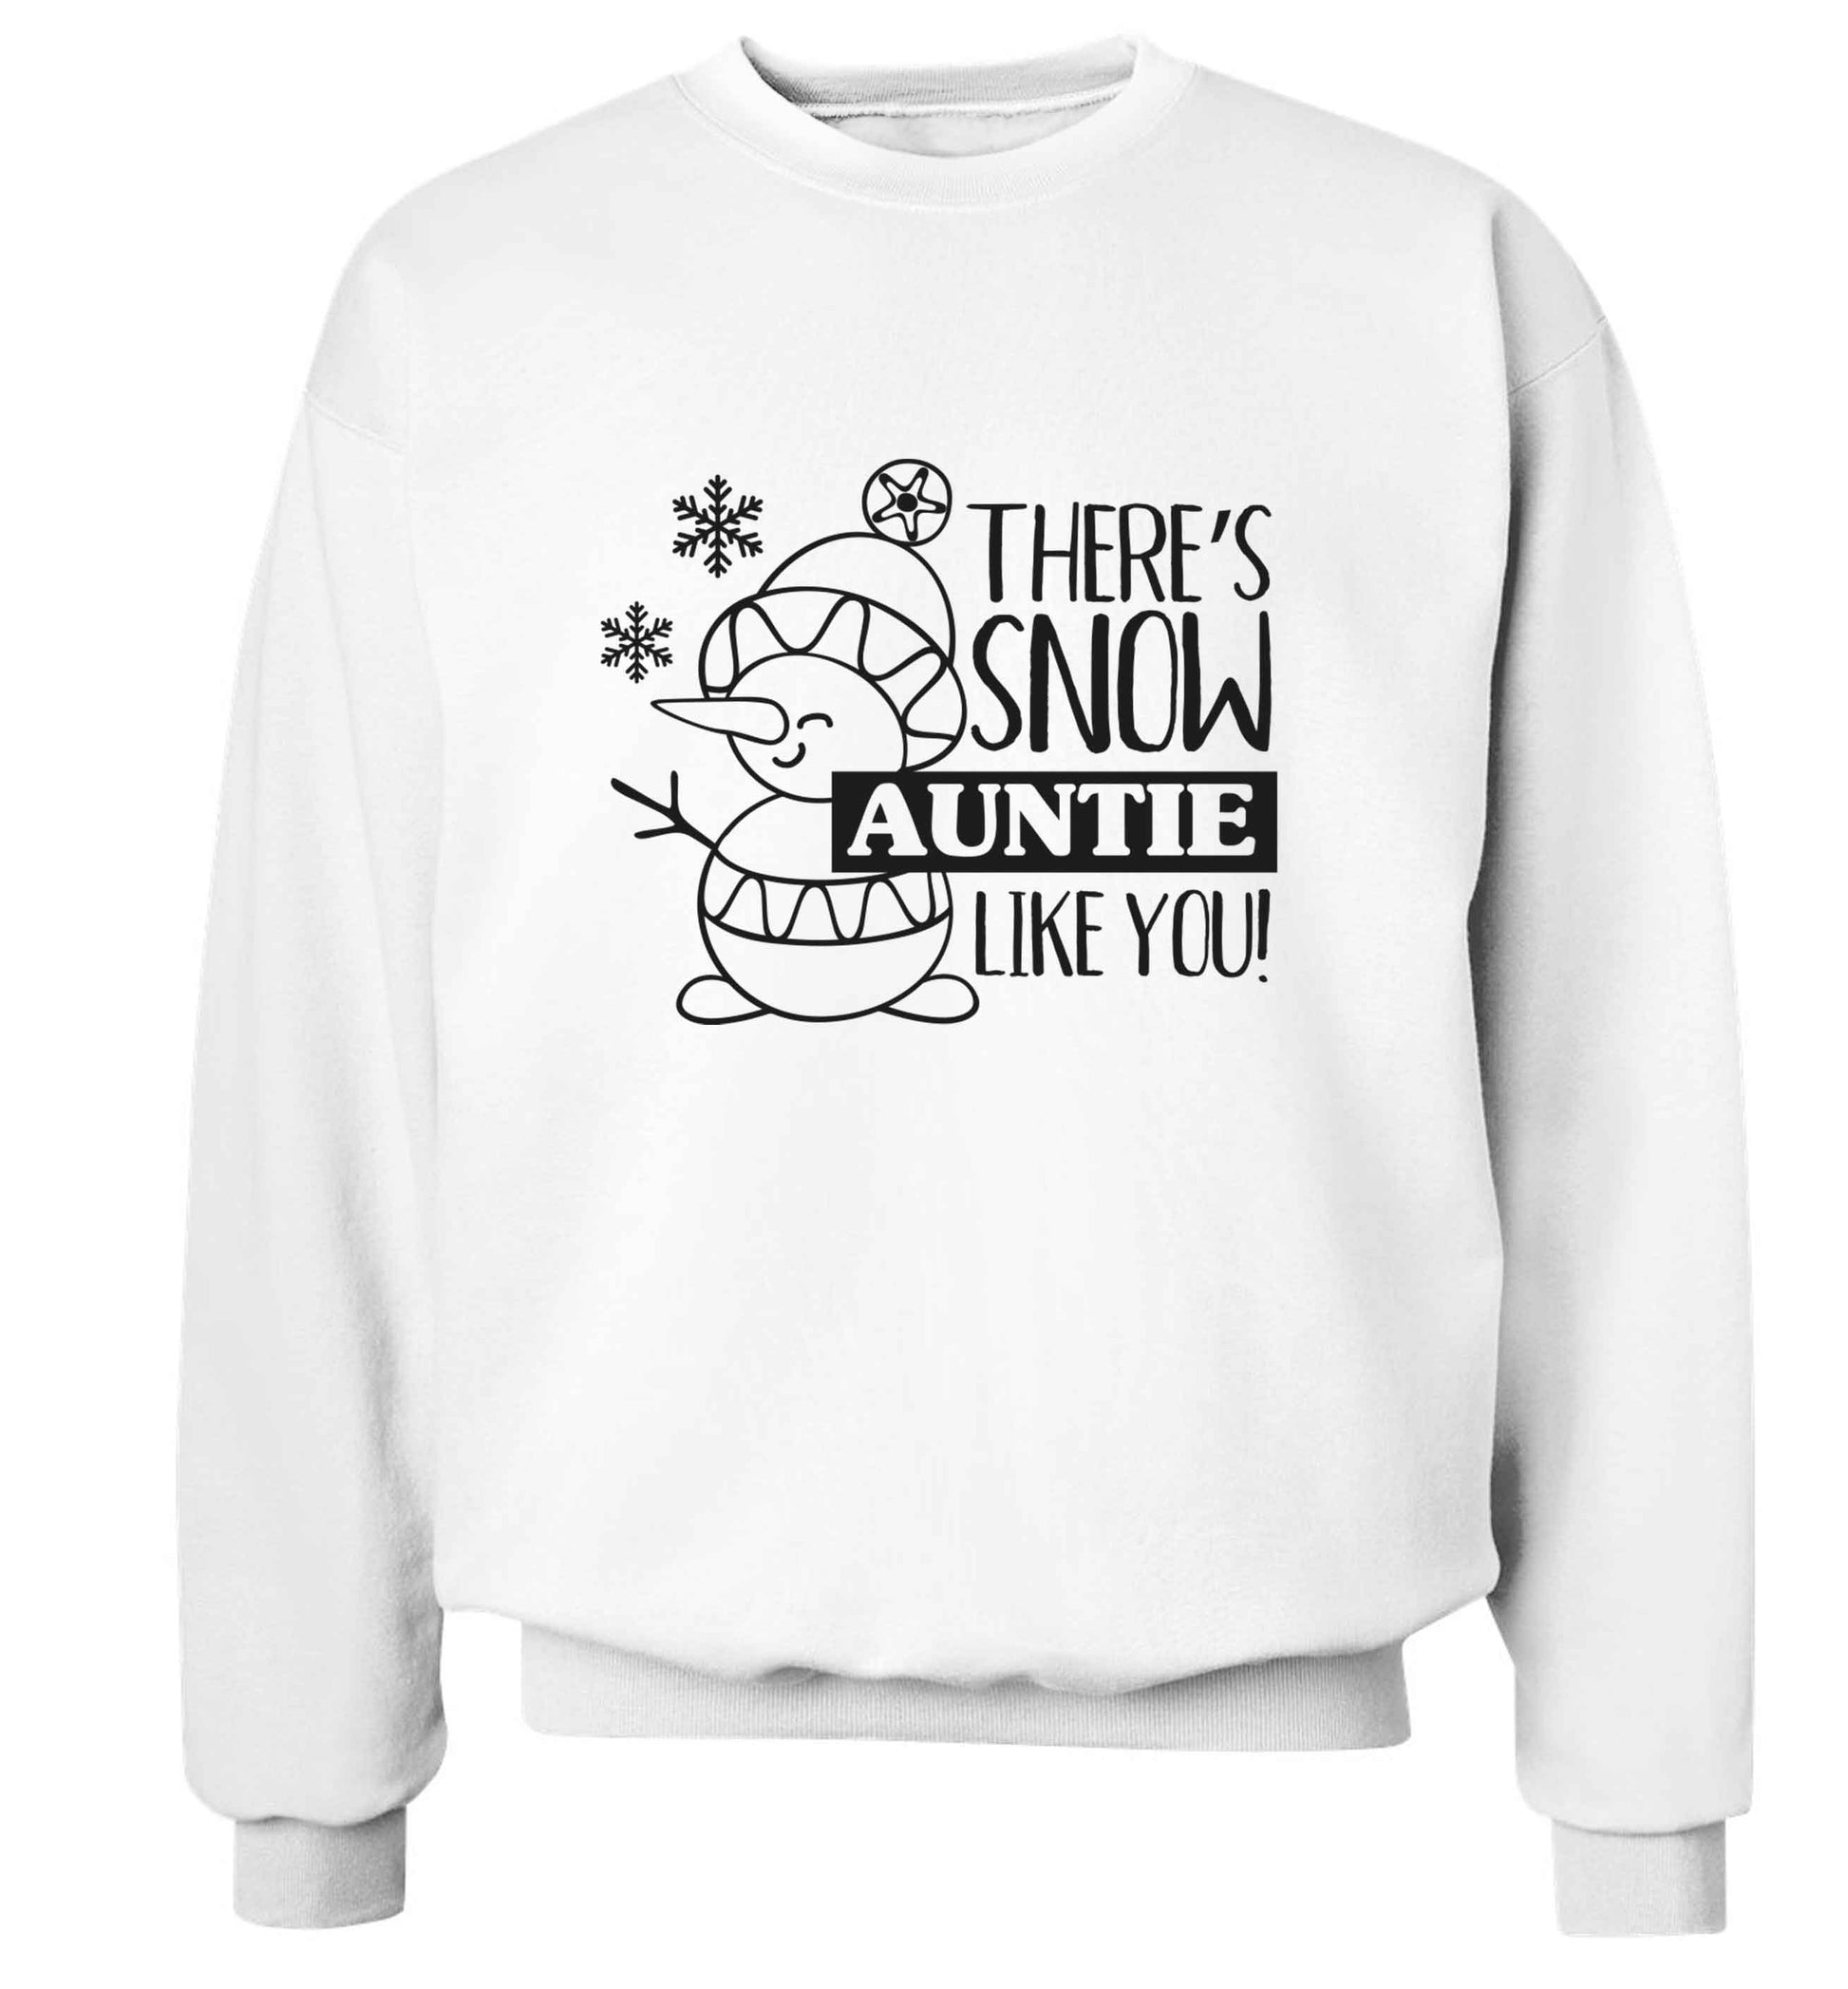 There's snow auntie like you adult's unisex white sweater 2XL